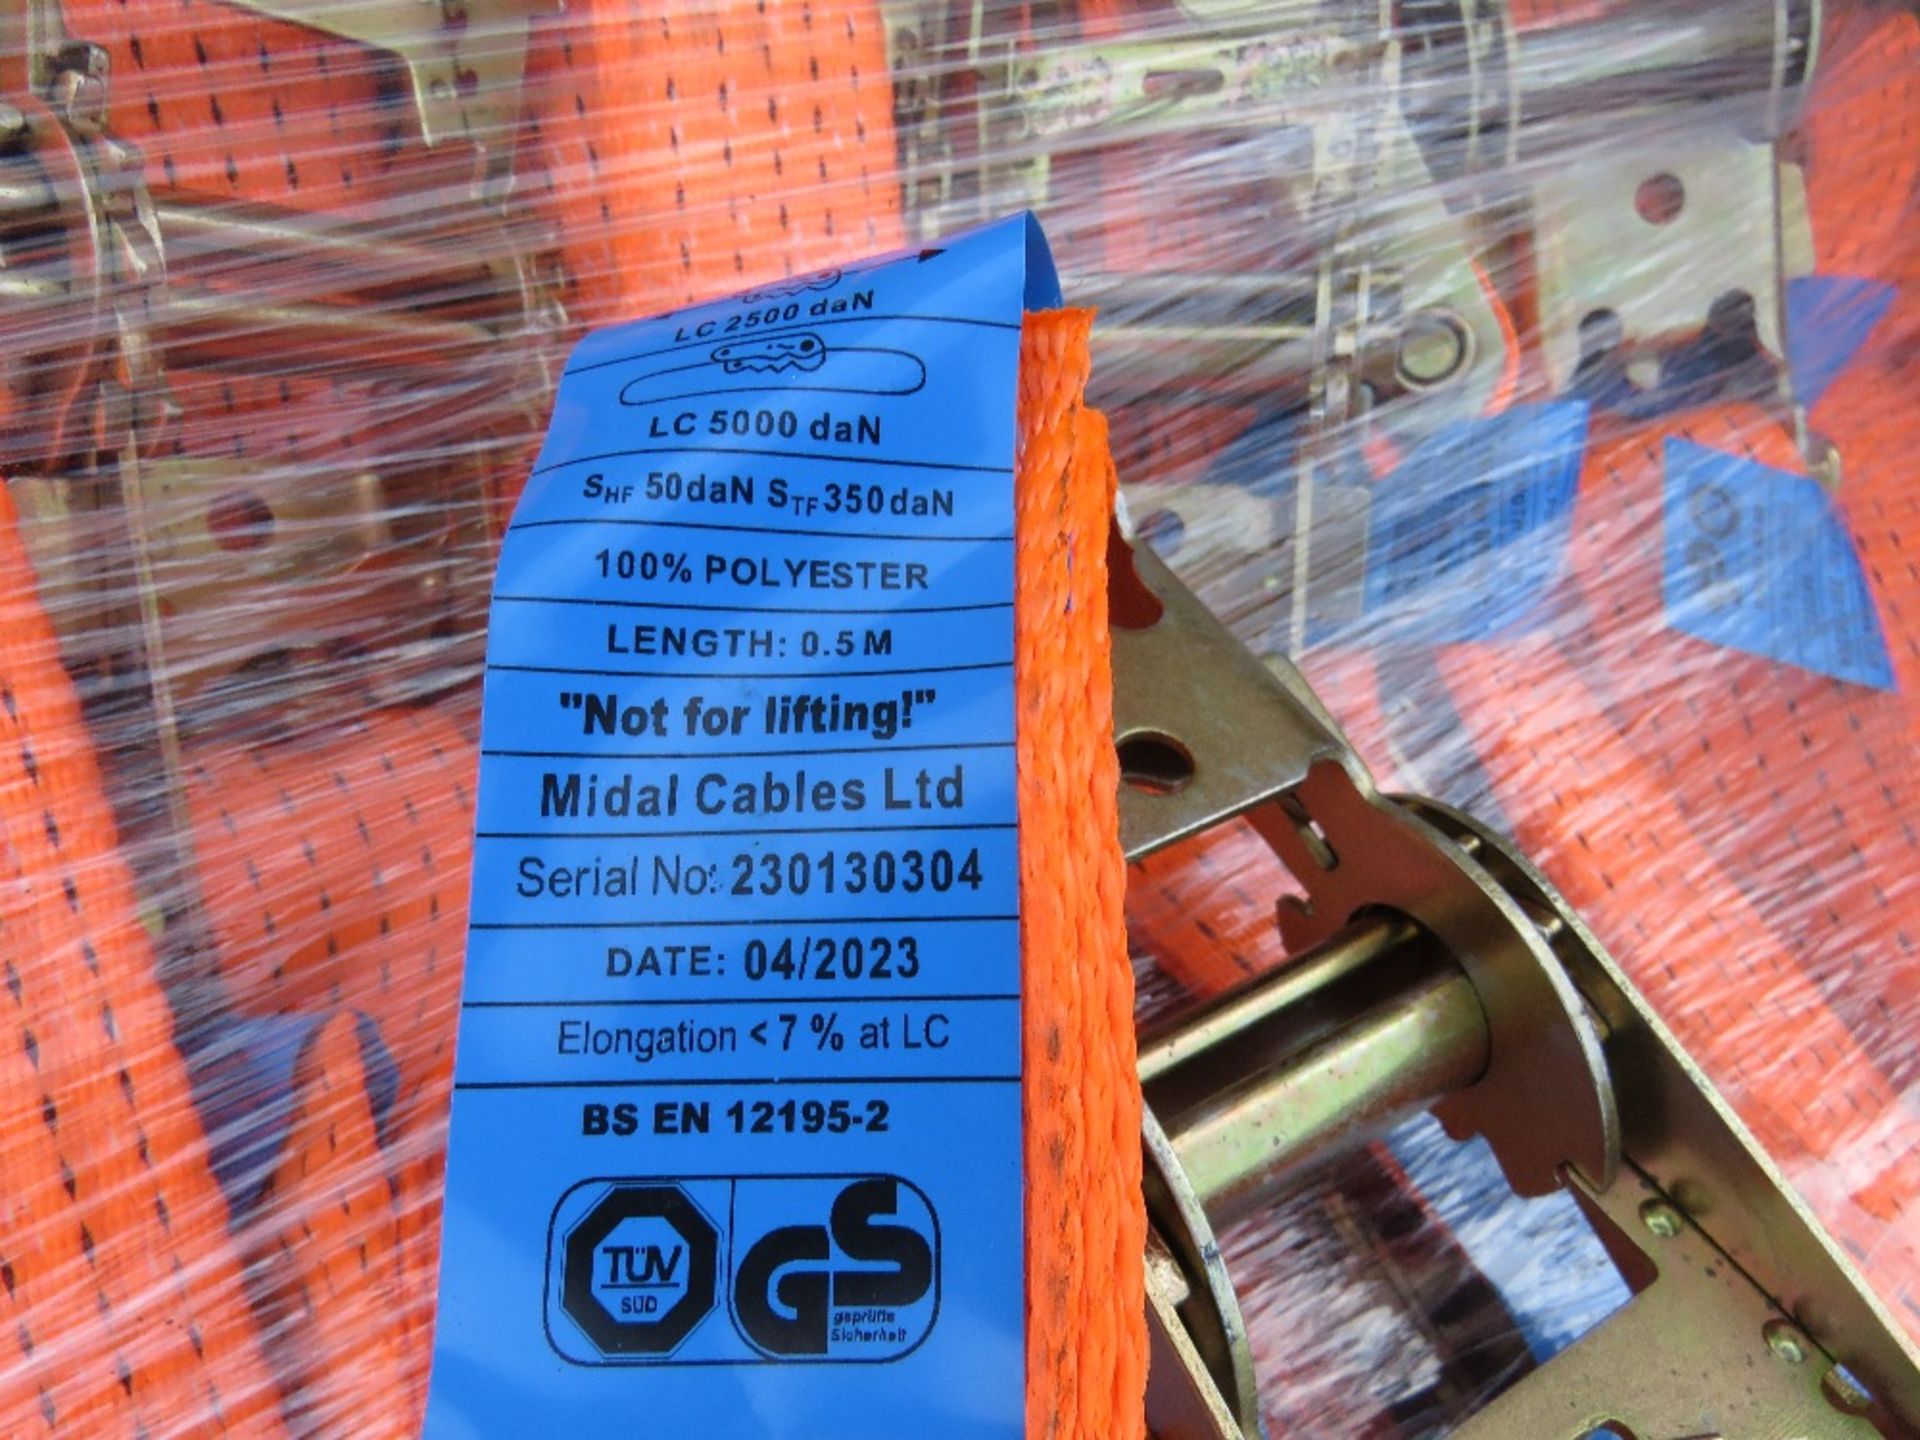 50NO LITTLE USED HEAVY DUTY 6.5METRE LENGTH 5 TONNE RATED RATCHET STRAPS (EX DOCK, SINGLE USE.) - Image 5 of 5